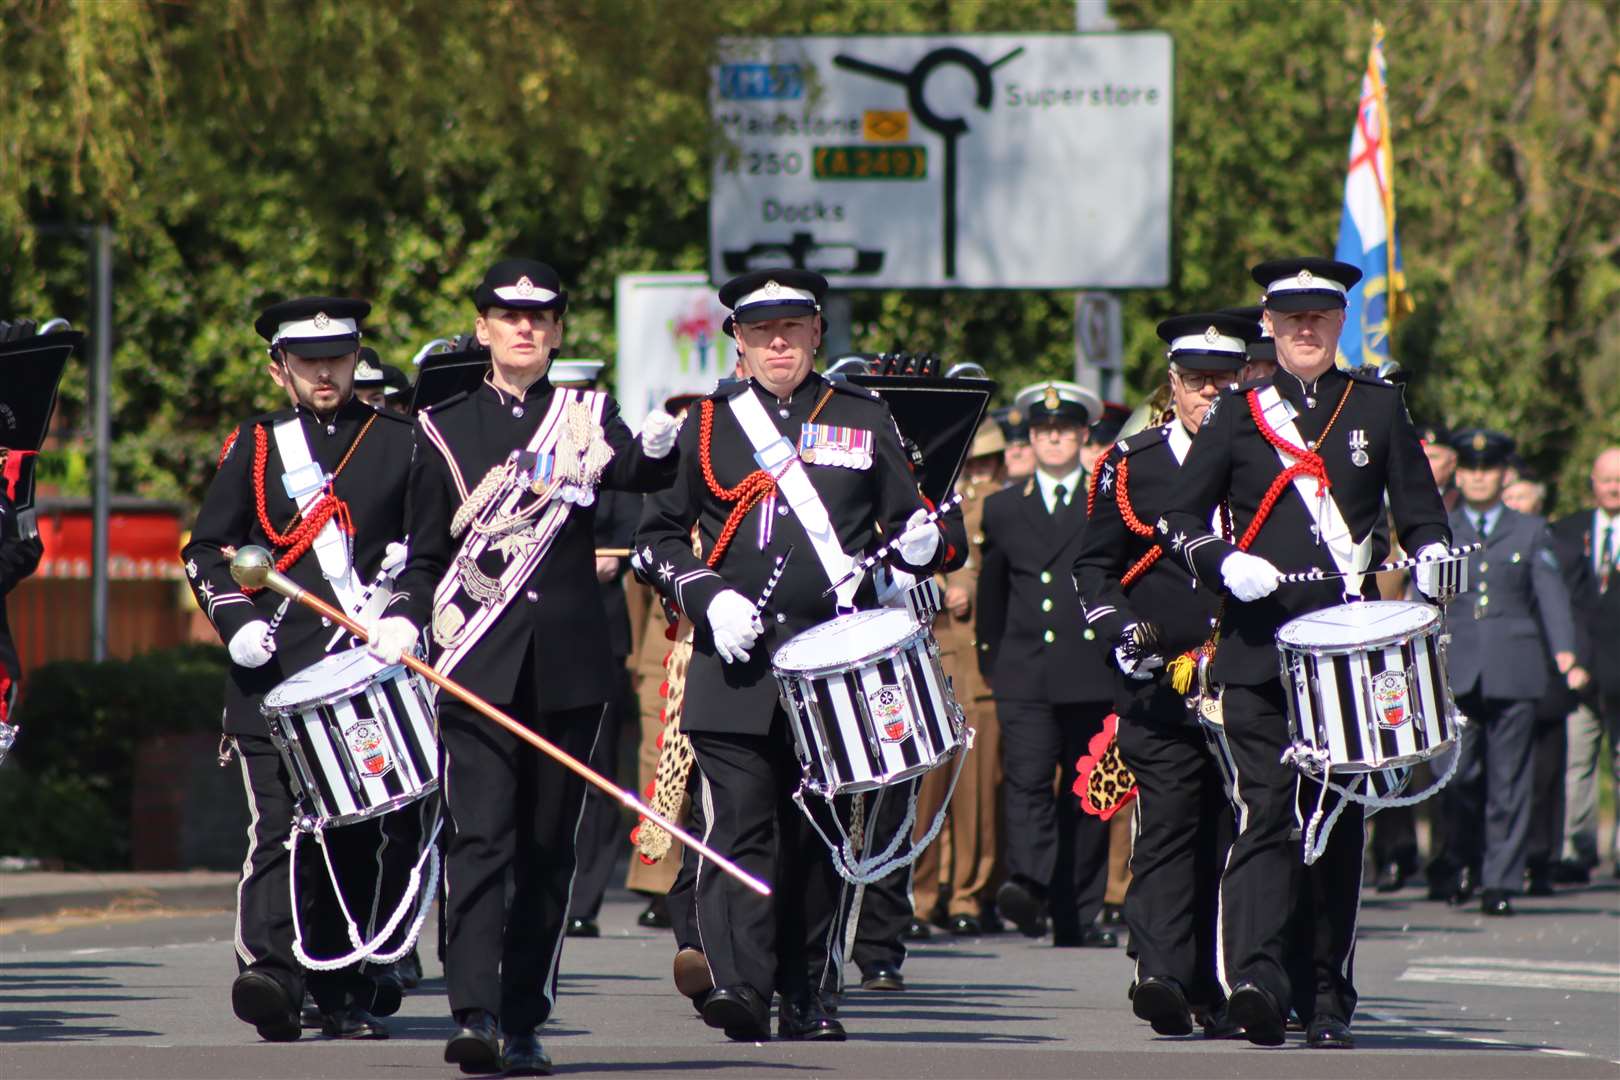 The Sheppey St John Ambulance Band leading the parade at the dedication ceremony for the new memorial wall at Sheerness war memorial on Sunday